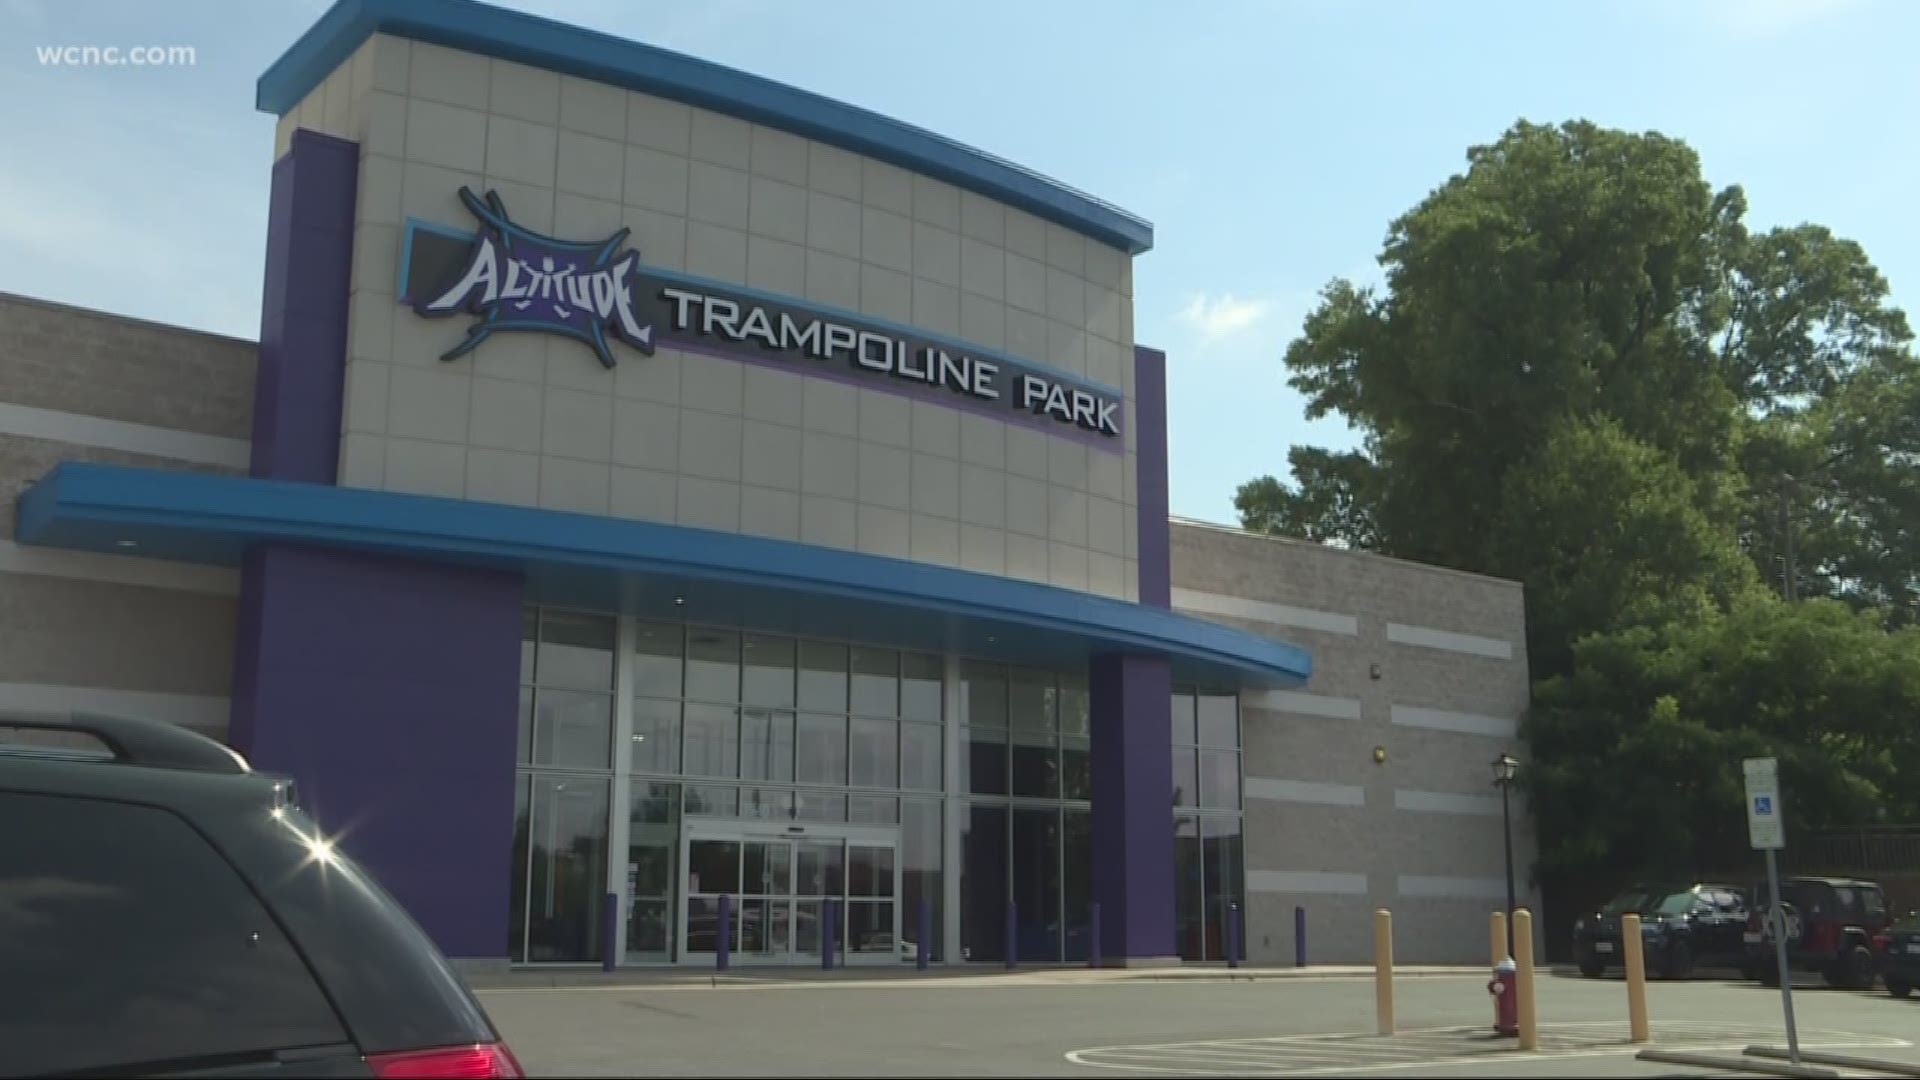 A teen is recovering after suffering a serious injury while playing at Gastonia's Altitude Trampoline Park. That's the same place where a 12-year-old boy died after falling from a climbing wall in June.